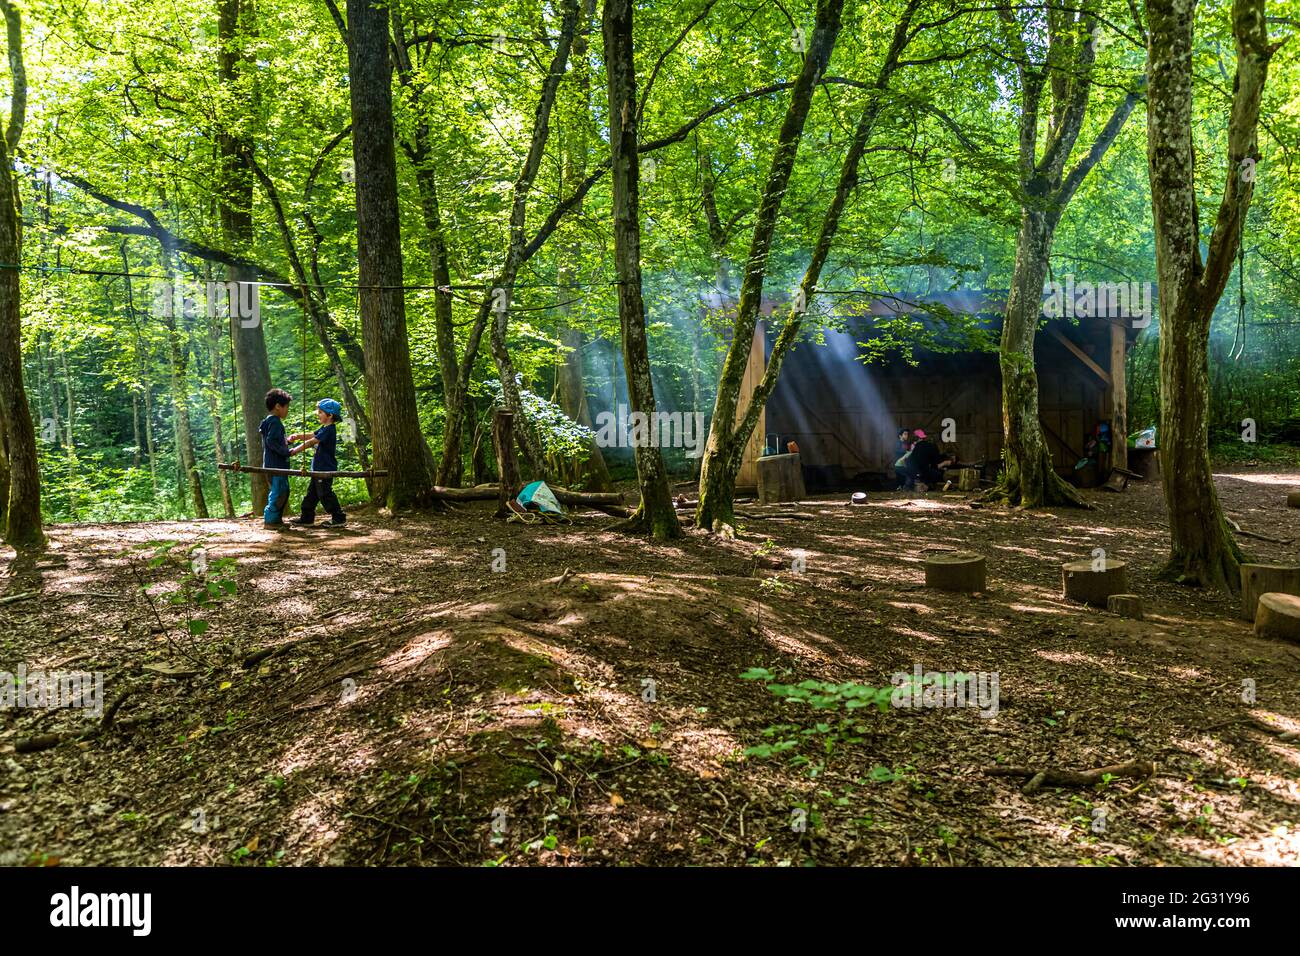 A family relaxes at a barbecue hut in the forest near Esch-sur-Alzette, Luxembourg. In the Ellergronn nature reserve there are also playgrounds for children along the hiking trails Stock Photo